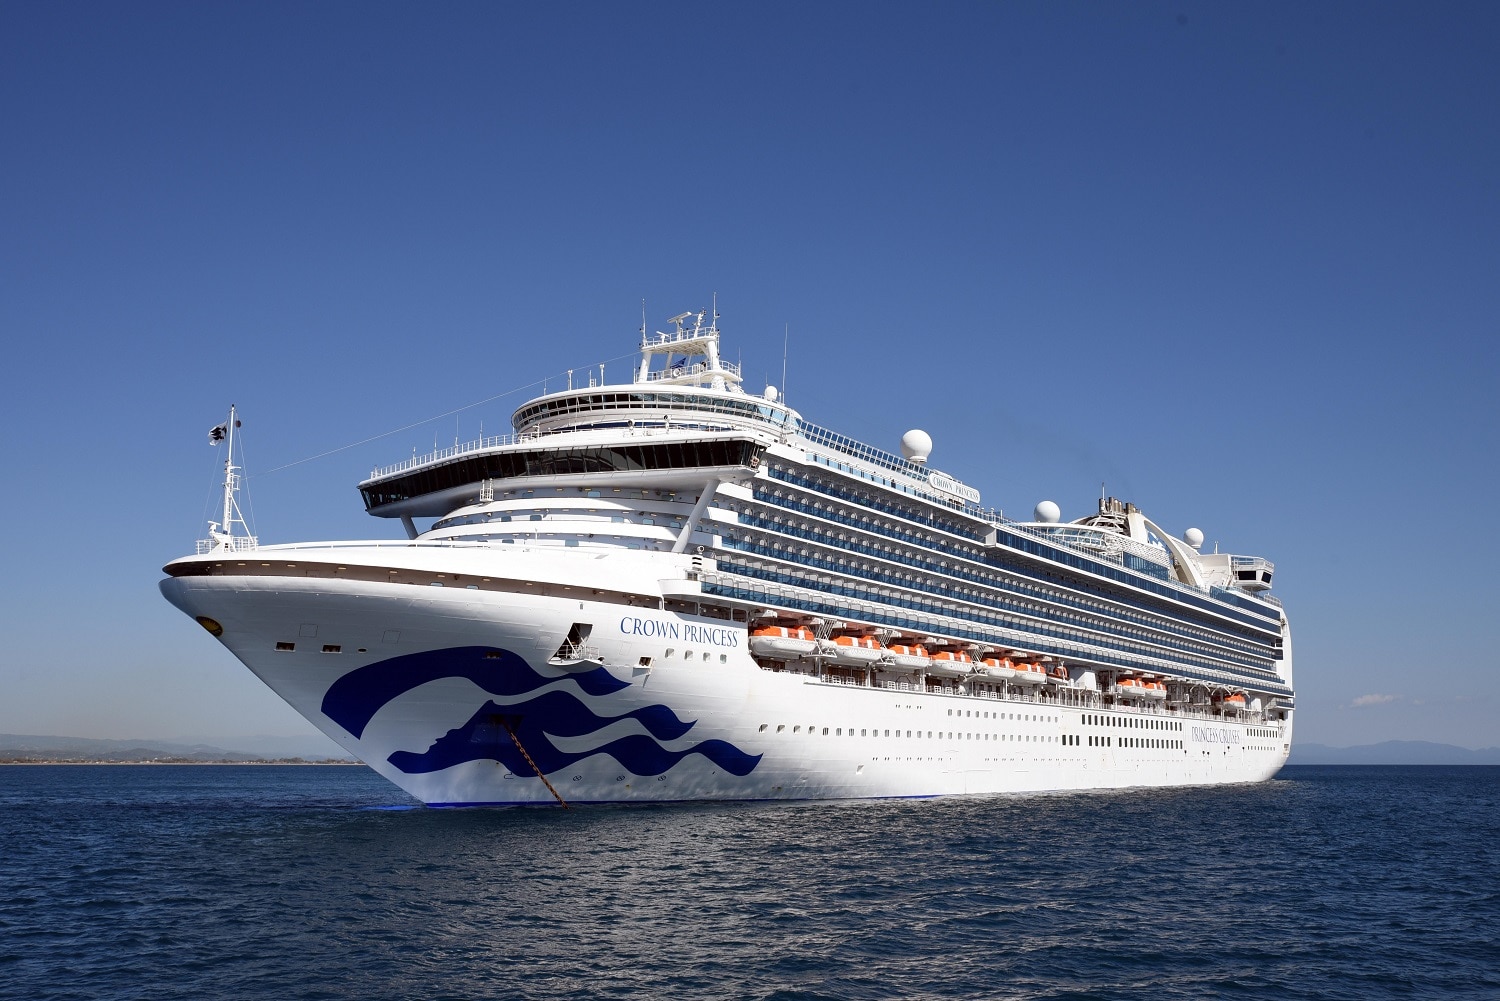 cruise line with crown logo